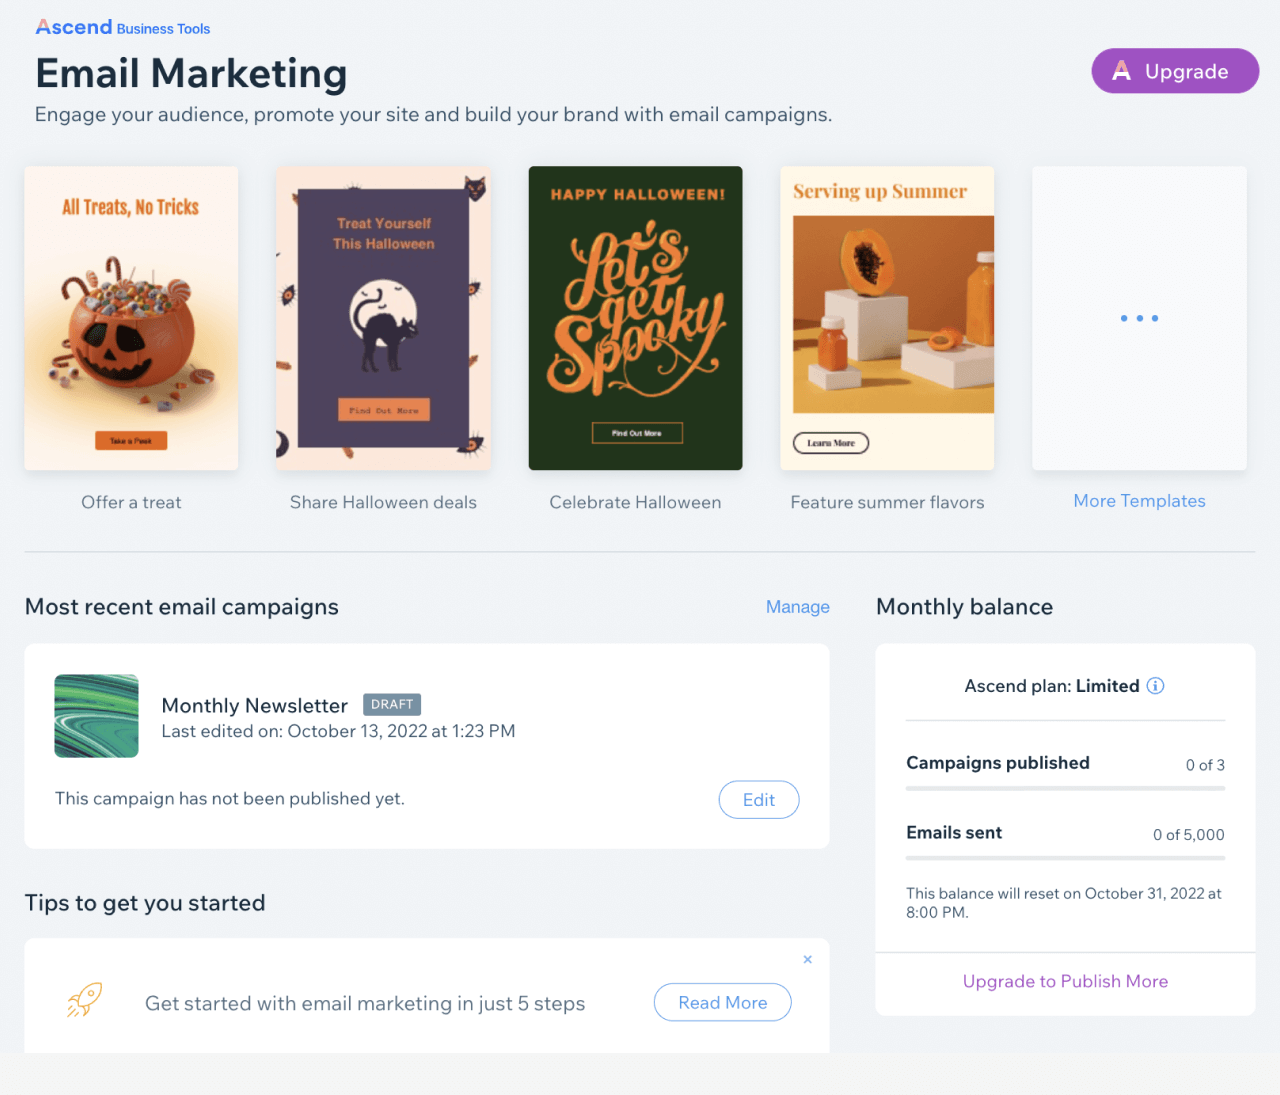 Ascend by Wix - Email Marketing Dashboard